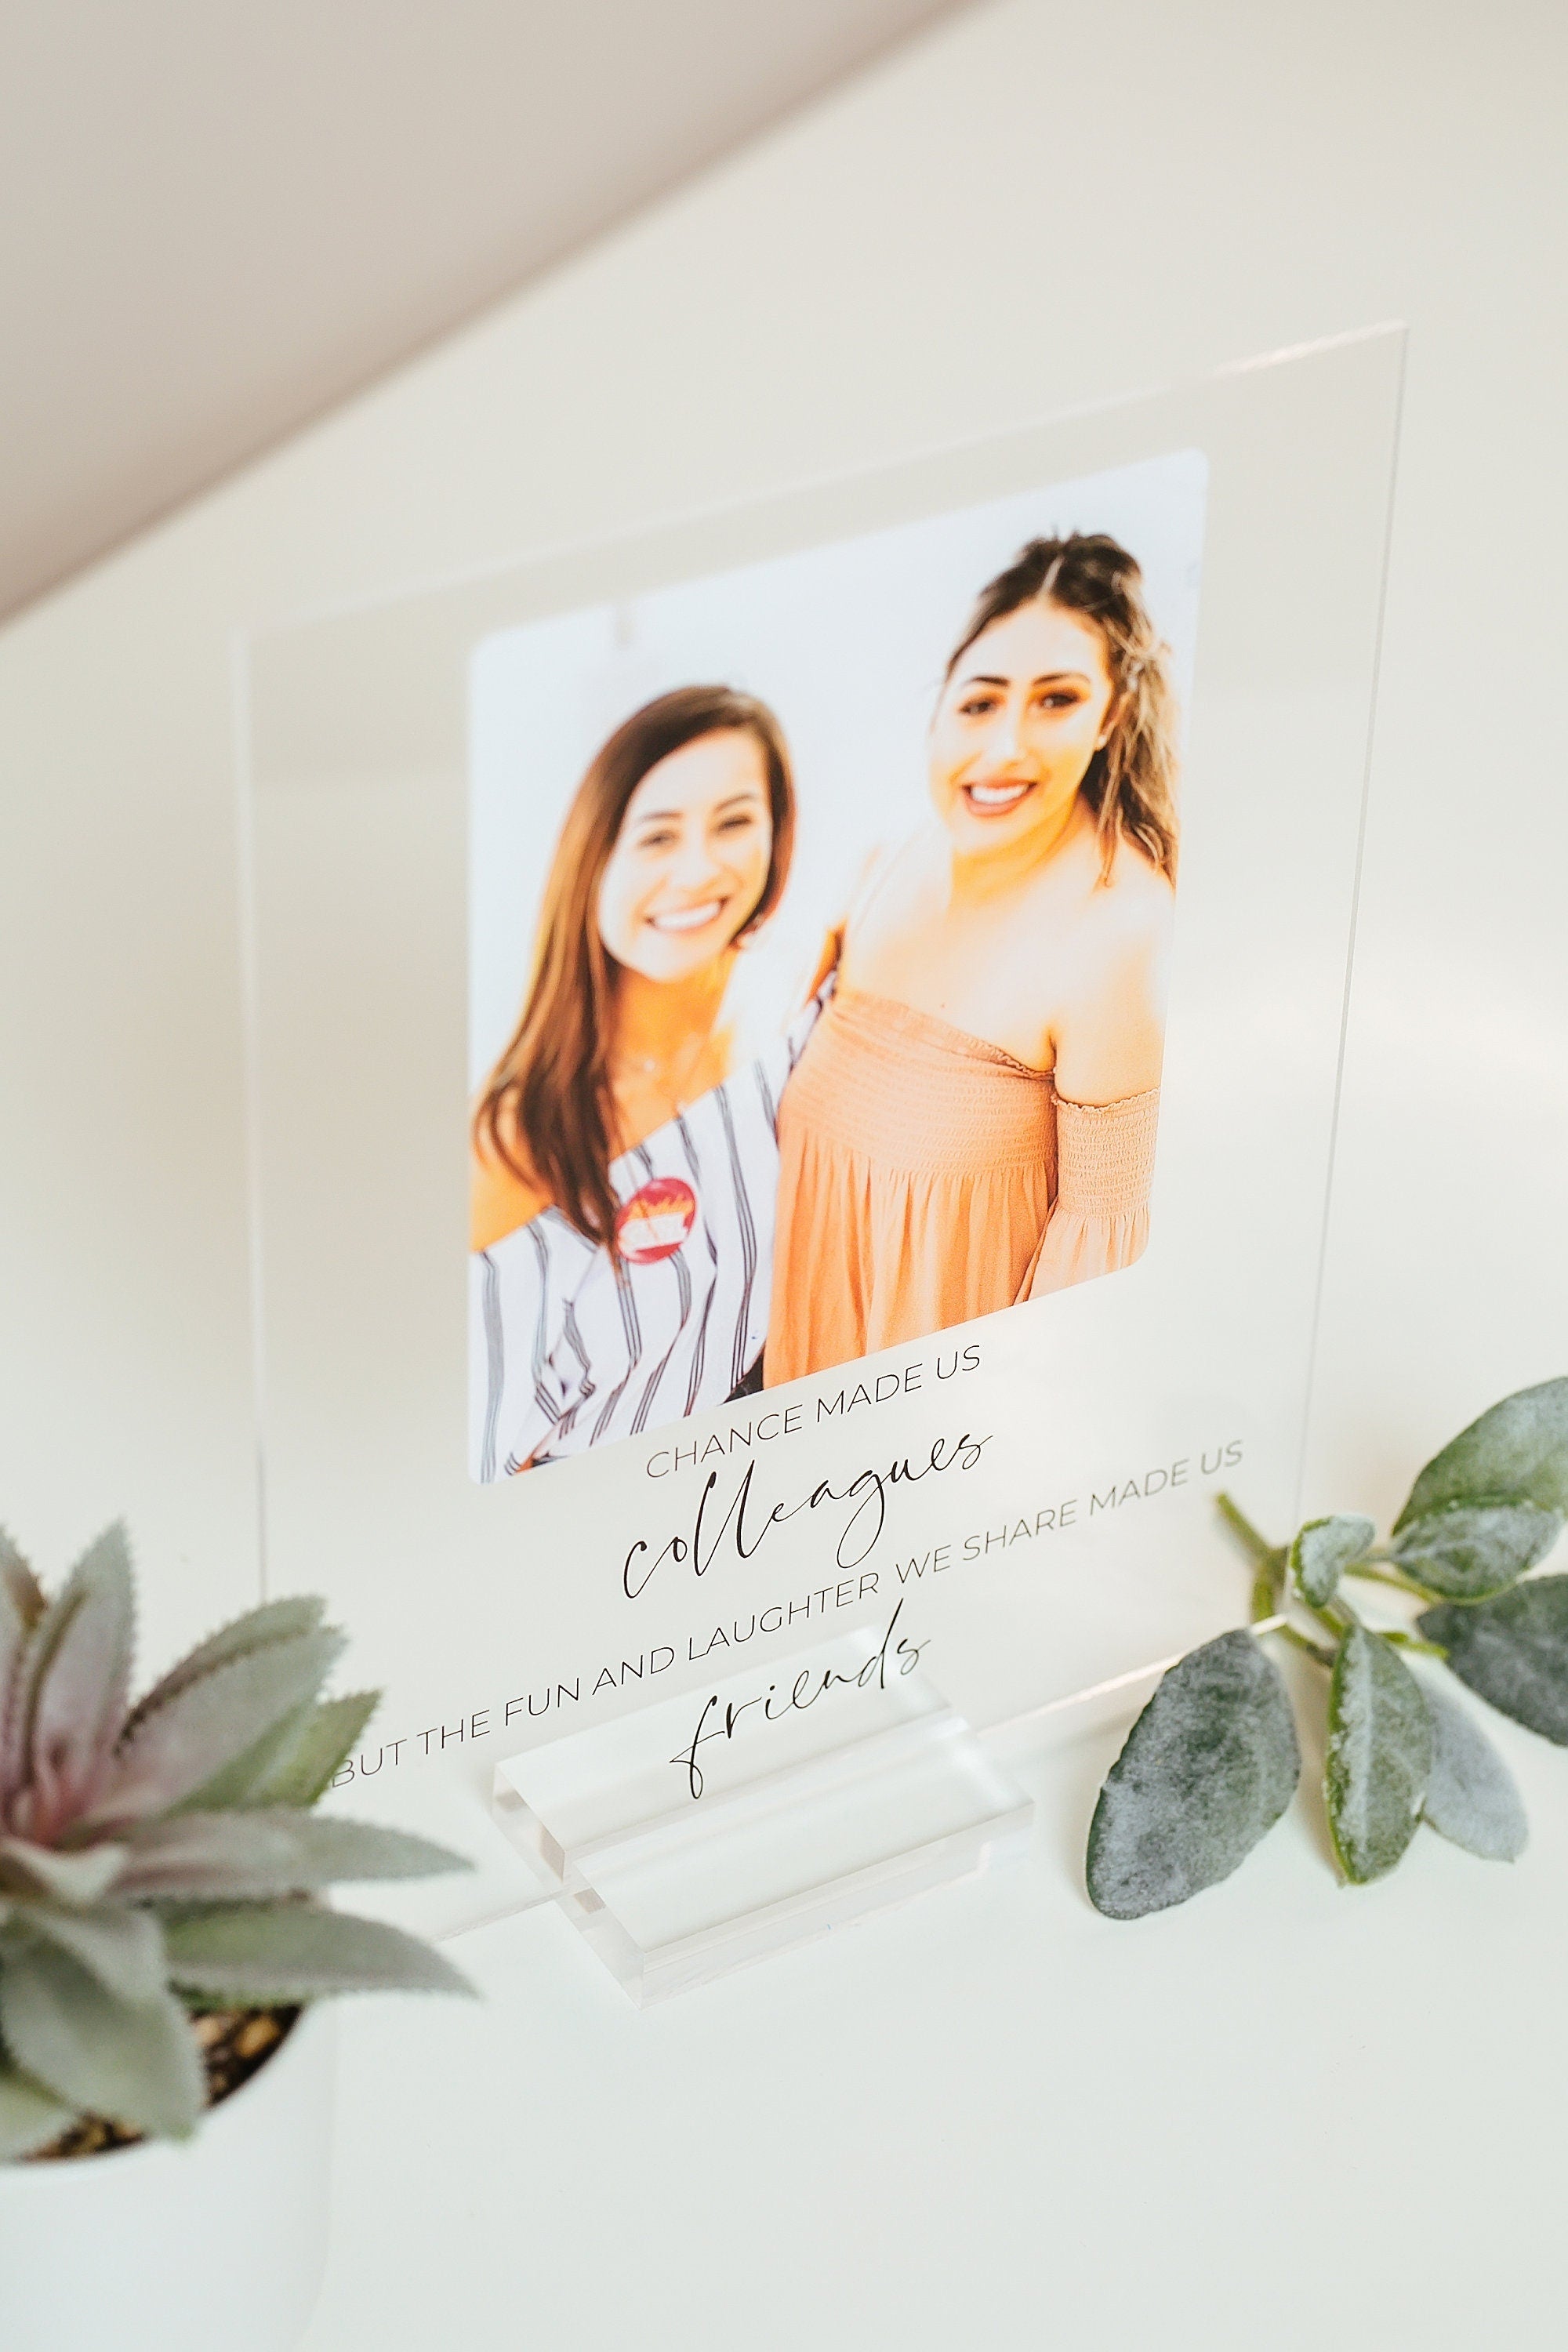 Personalized Photo Plaque w Stand, Couple Gift, Gift for Her, Gift for Him, Photo Collage, Best Friend Gifts, Personalized Photo Memorial